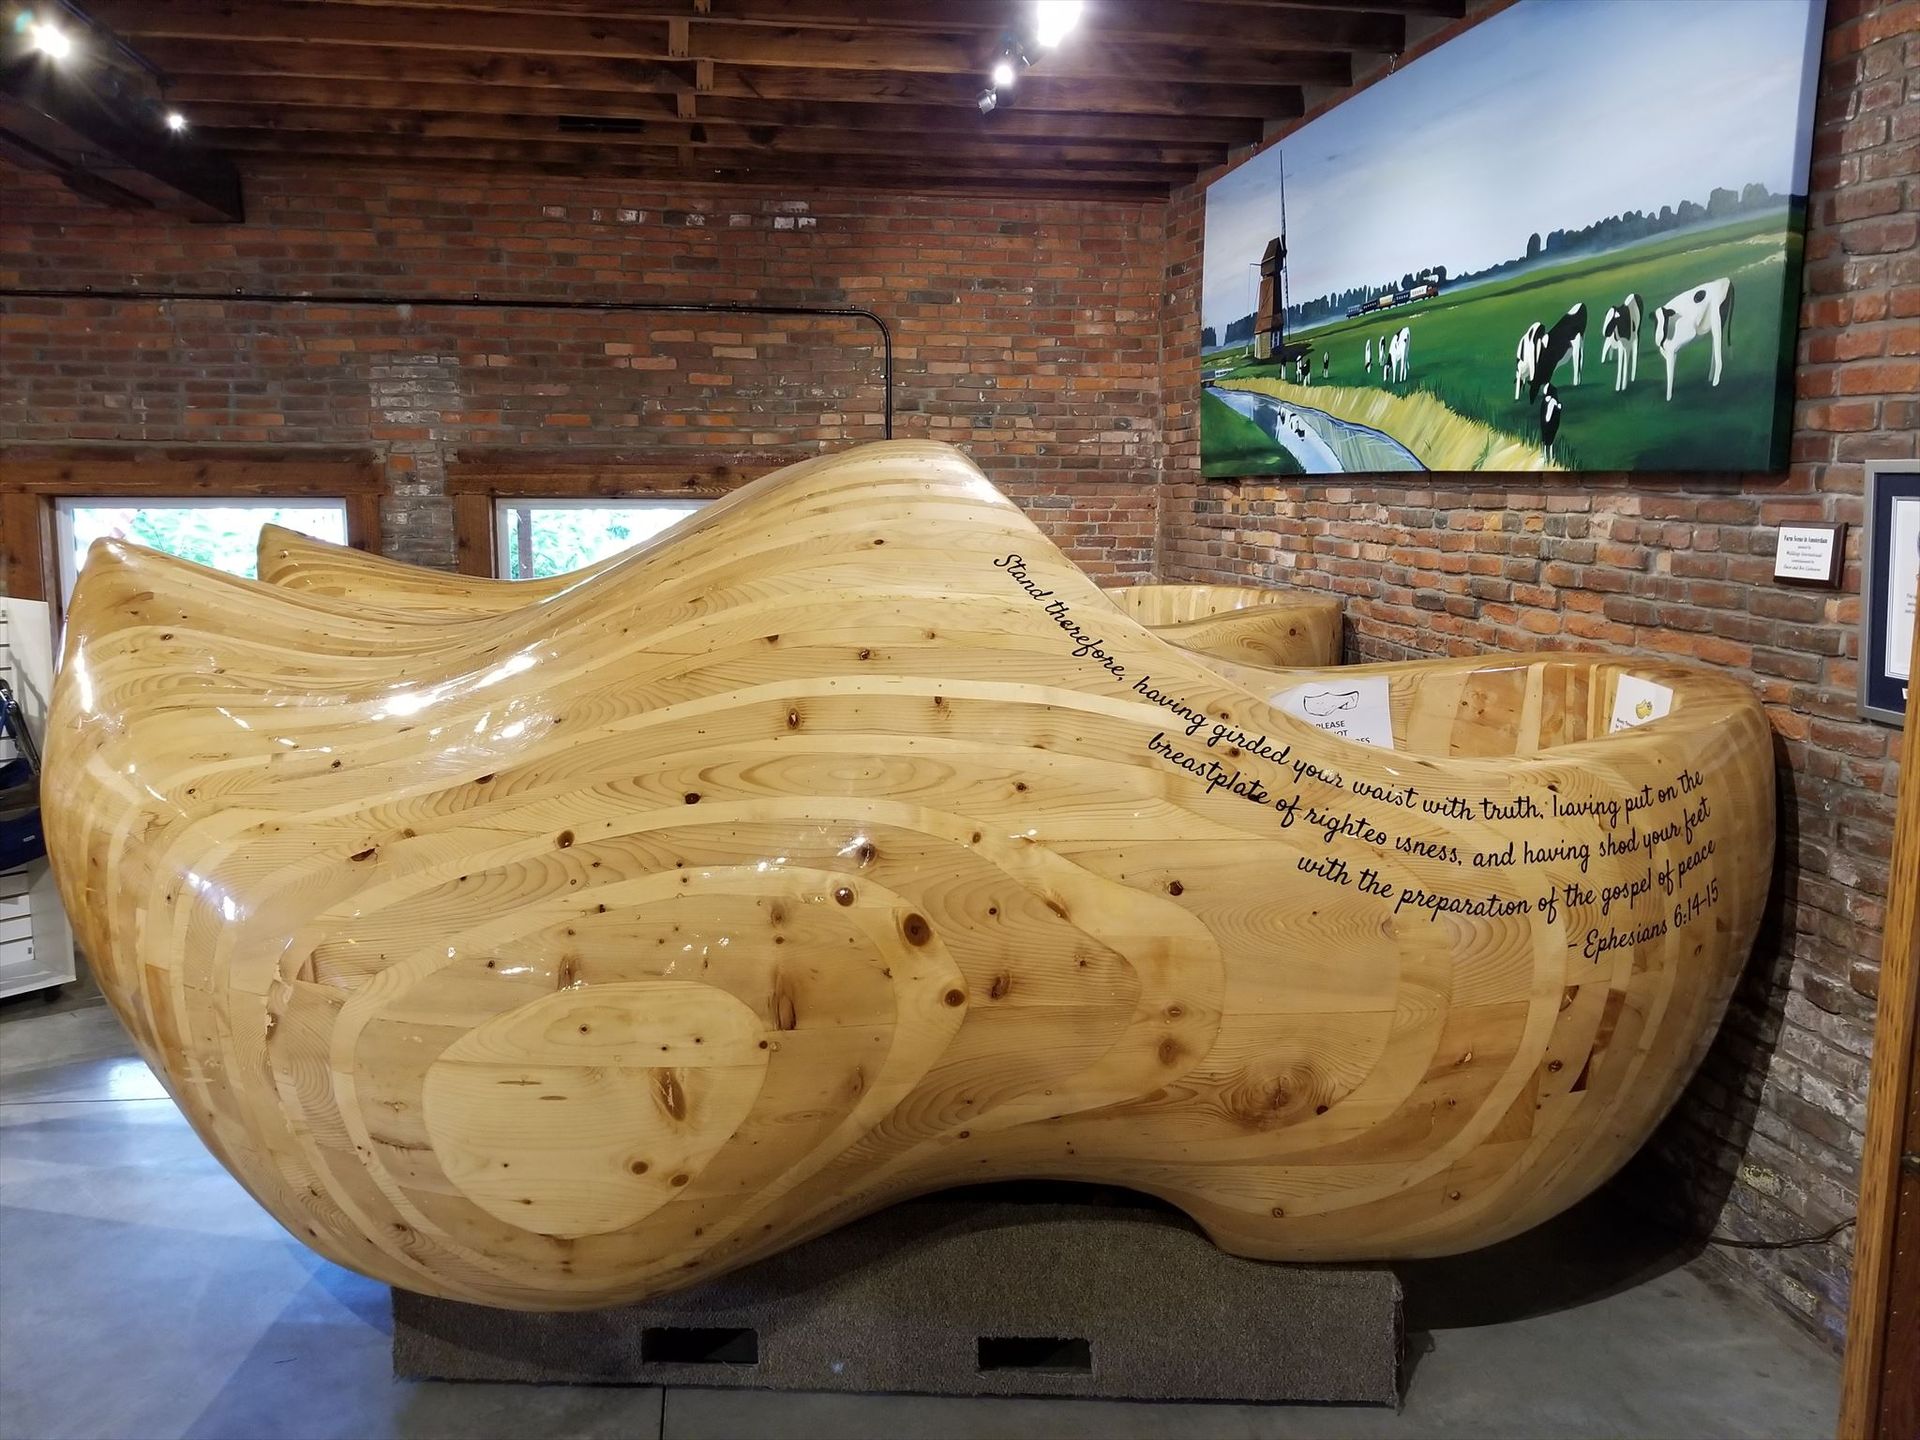 
World's Largest Wooden Shoes, world record in Casey, Illinois